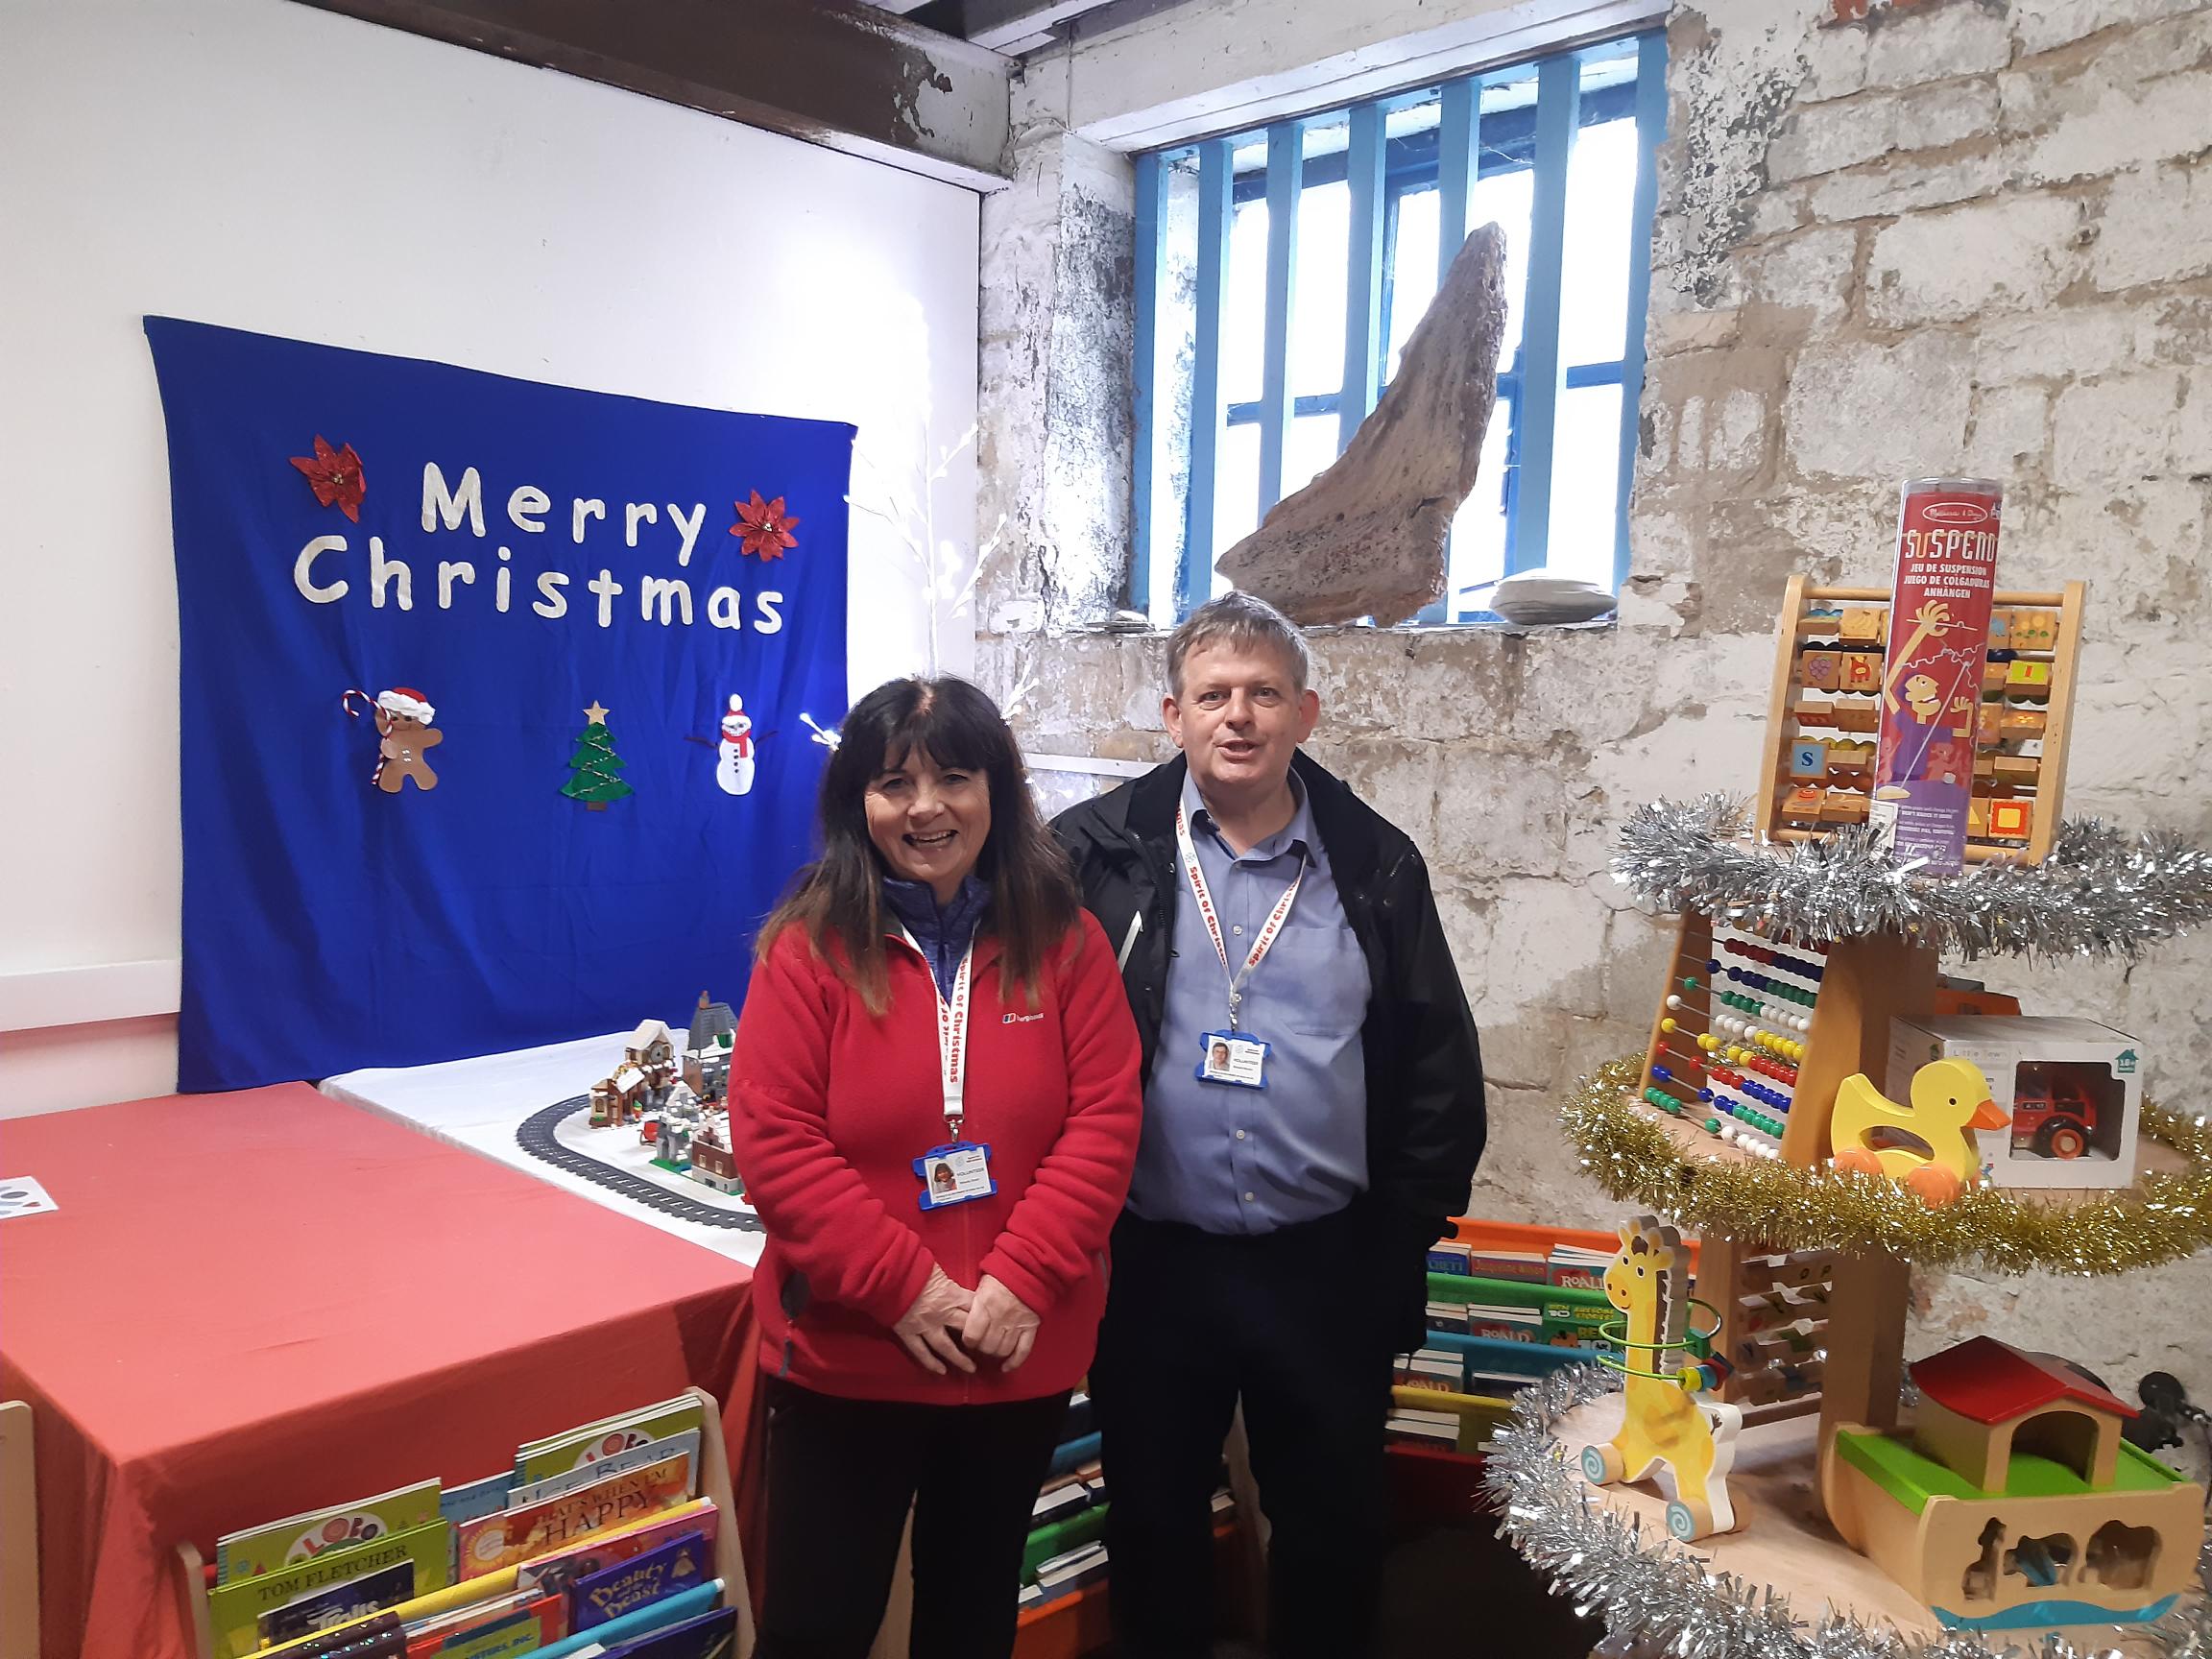  On Wednesday 16 November Commissioner Zoë’s Community Engagement Officer attended an open day in Selby by the Spirit of Christmas Charity who specialise in providing for children at Christmas. At the open day they got to experience exchanging the provided pretend invite to enter their wonderful Christmas toy shop followed by going through to the Christmas wrapping paper station room should they want the presents wrapped for Christmas Day. The charity is a recent recipient of the Commissioner’s Community Fund and was awarded £1,000.00 which will go towards helping them achieve the following: 1. Run Christmas parties in December 2022 (in the Selby and York regions) for low-income families 2. Help run their Christmas Toy Bank in Selby where families are invited to come and select presents from their “shop” for their children. 3. Help provide pupils from local primary schools with a Christmas present. 4. Also go toward their all-year run project ‘Banana Box Toy Project’ that gives away boxes of educational and special education needs toys to families who are struggling. We cover a 30 mile radius of Selby and have delivered boxes to families in York, Tadcaster, Sherburn, Acomb, Harrogate and Ripon. They do this through a referral system used by local foodbank, schools, council services etc. Last year they catered for 490 children via this project A big thank you to Ronnie; Dianne; Wendy; and all the lovely enthusiastic volunteers for a festive event as well as getting to see and hear all about the project and future plans.